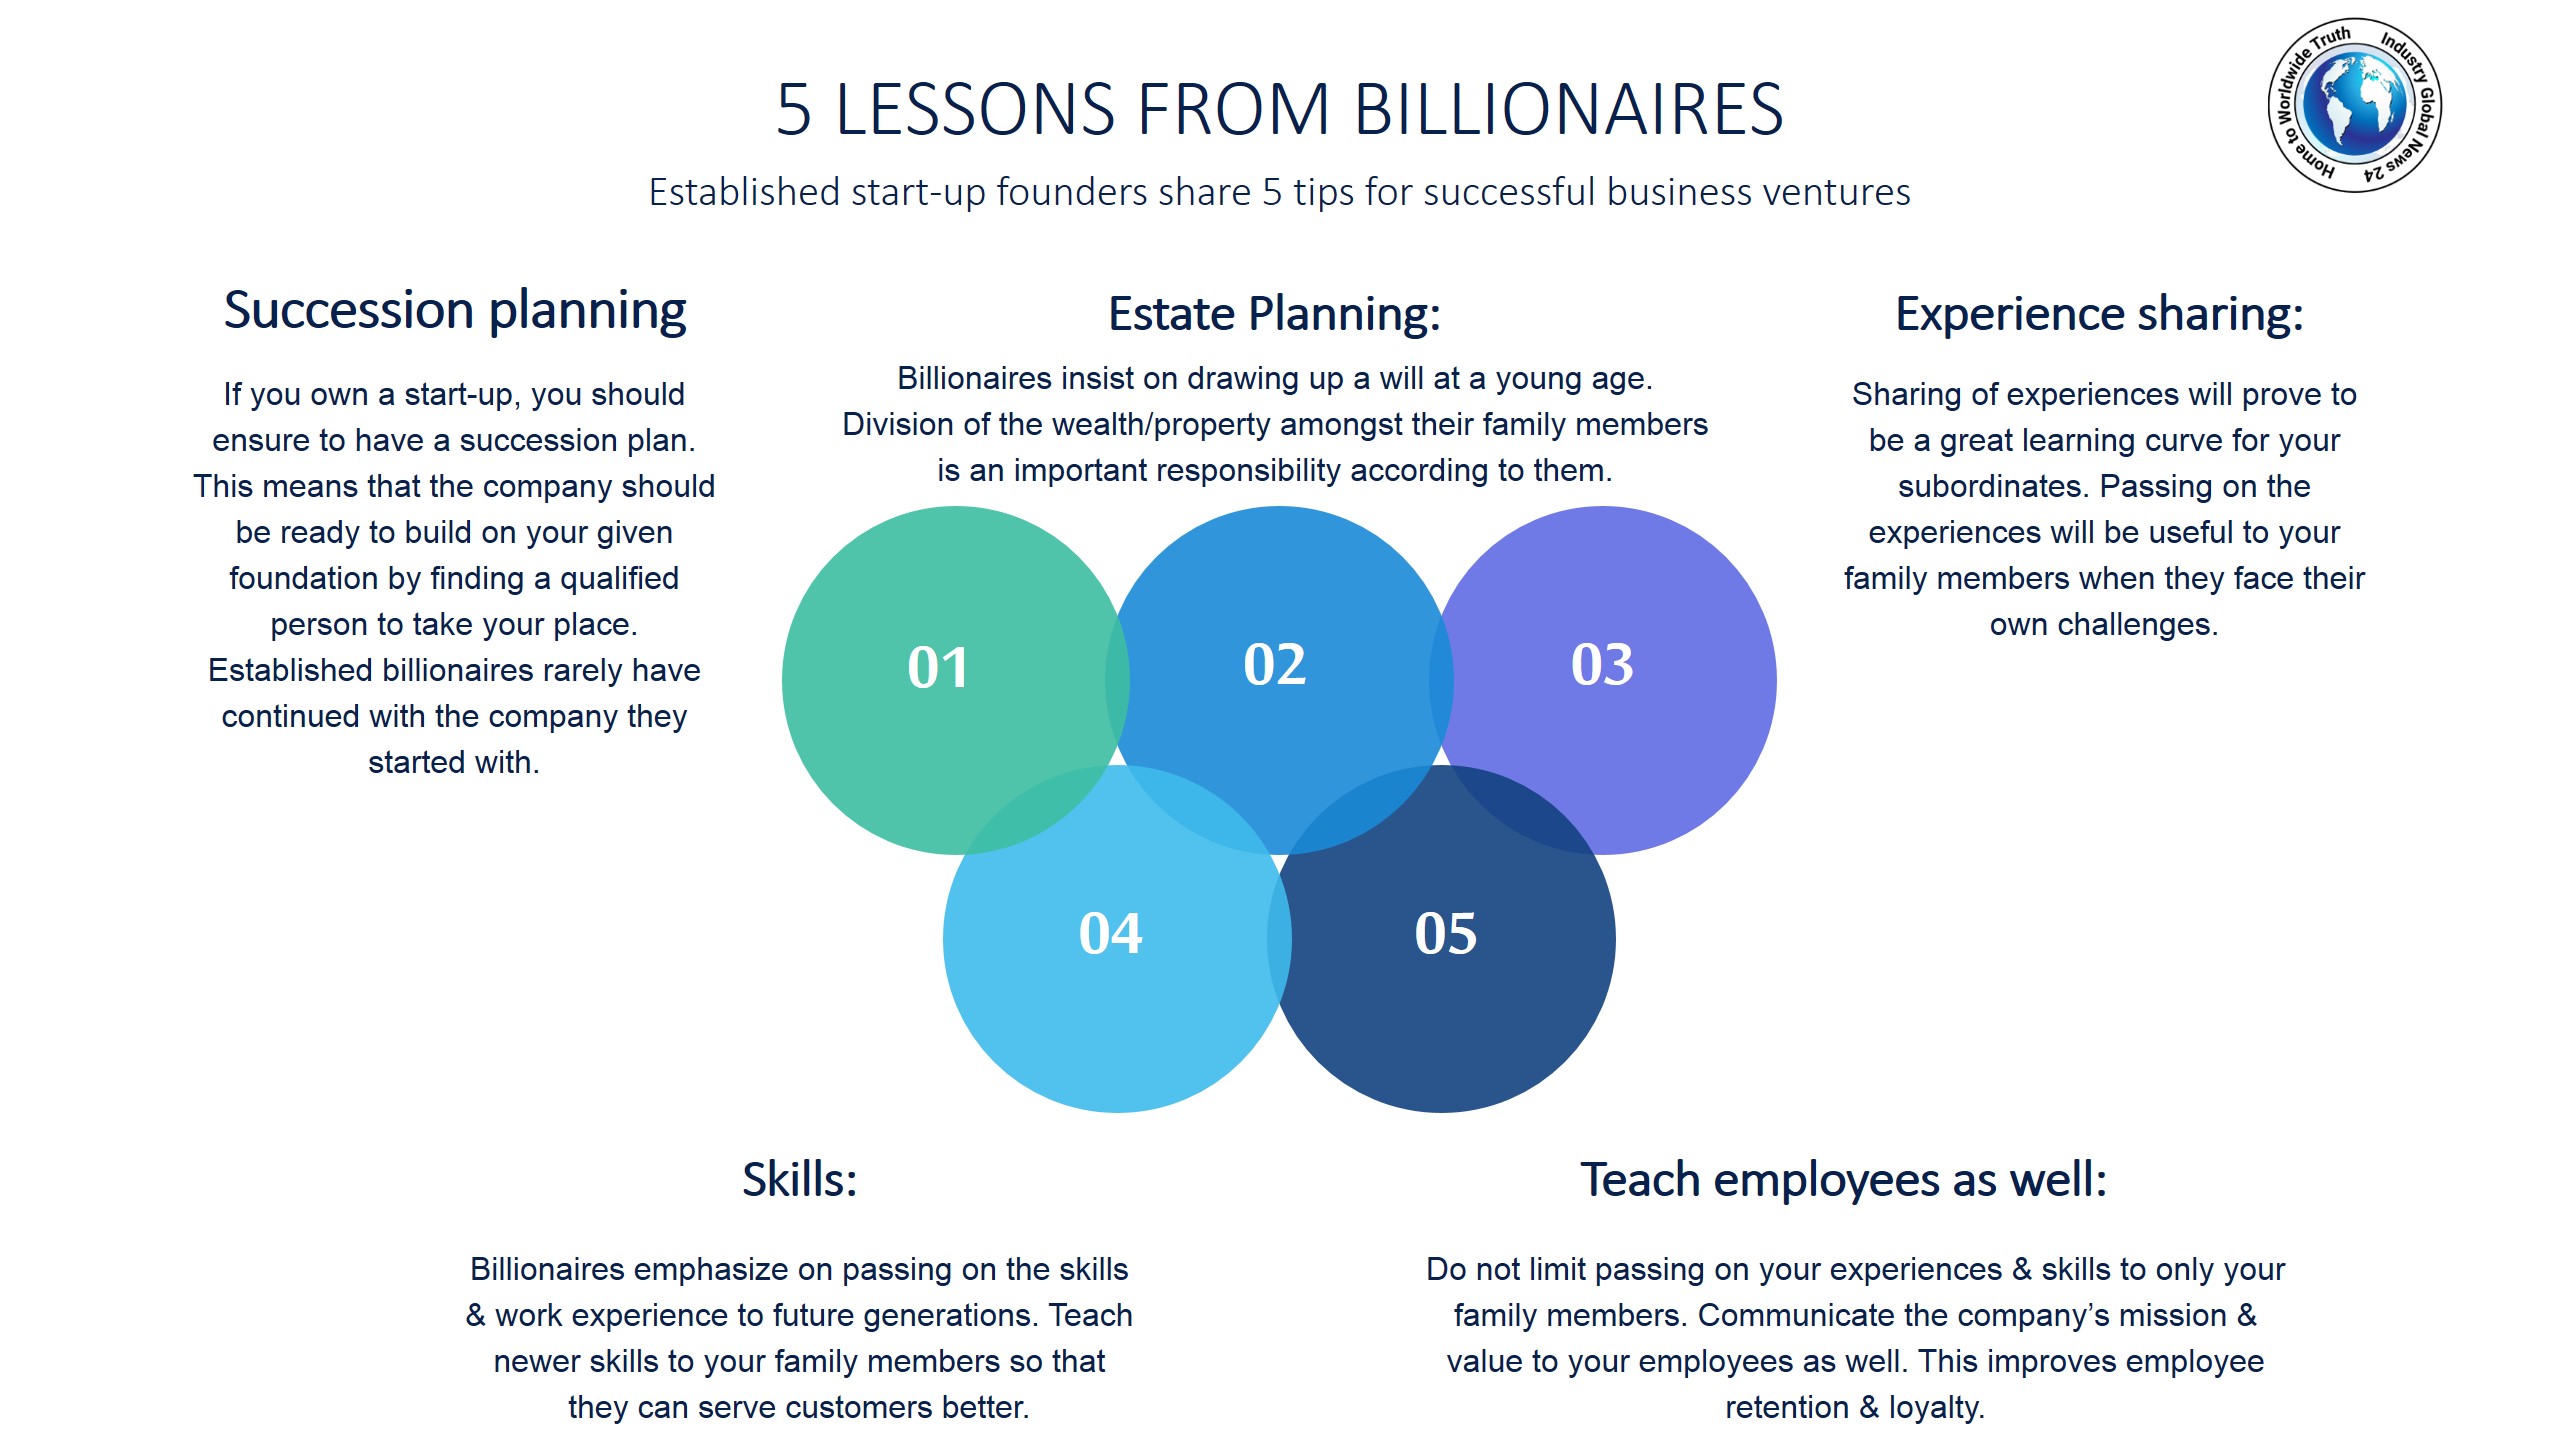 5 lessons from billionaires